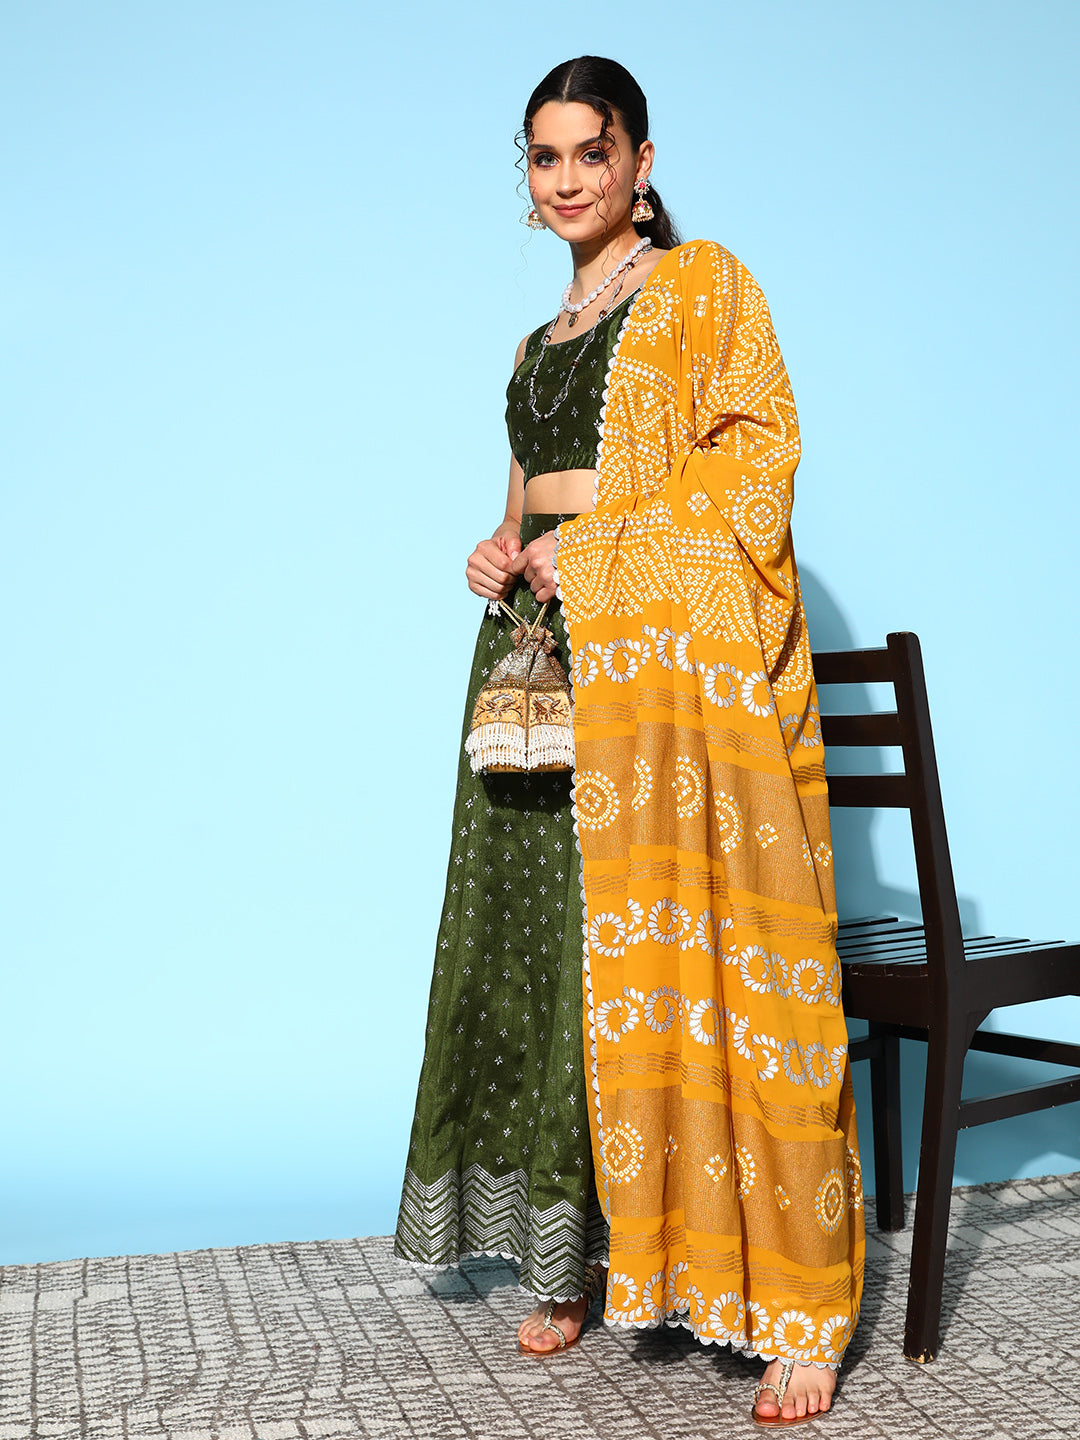 Ahalyaa Olive Green & Silver-Toned Printed Ready to Wear Lehenga & Blouse With Dupatta